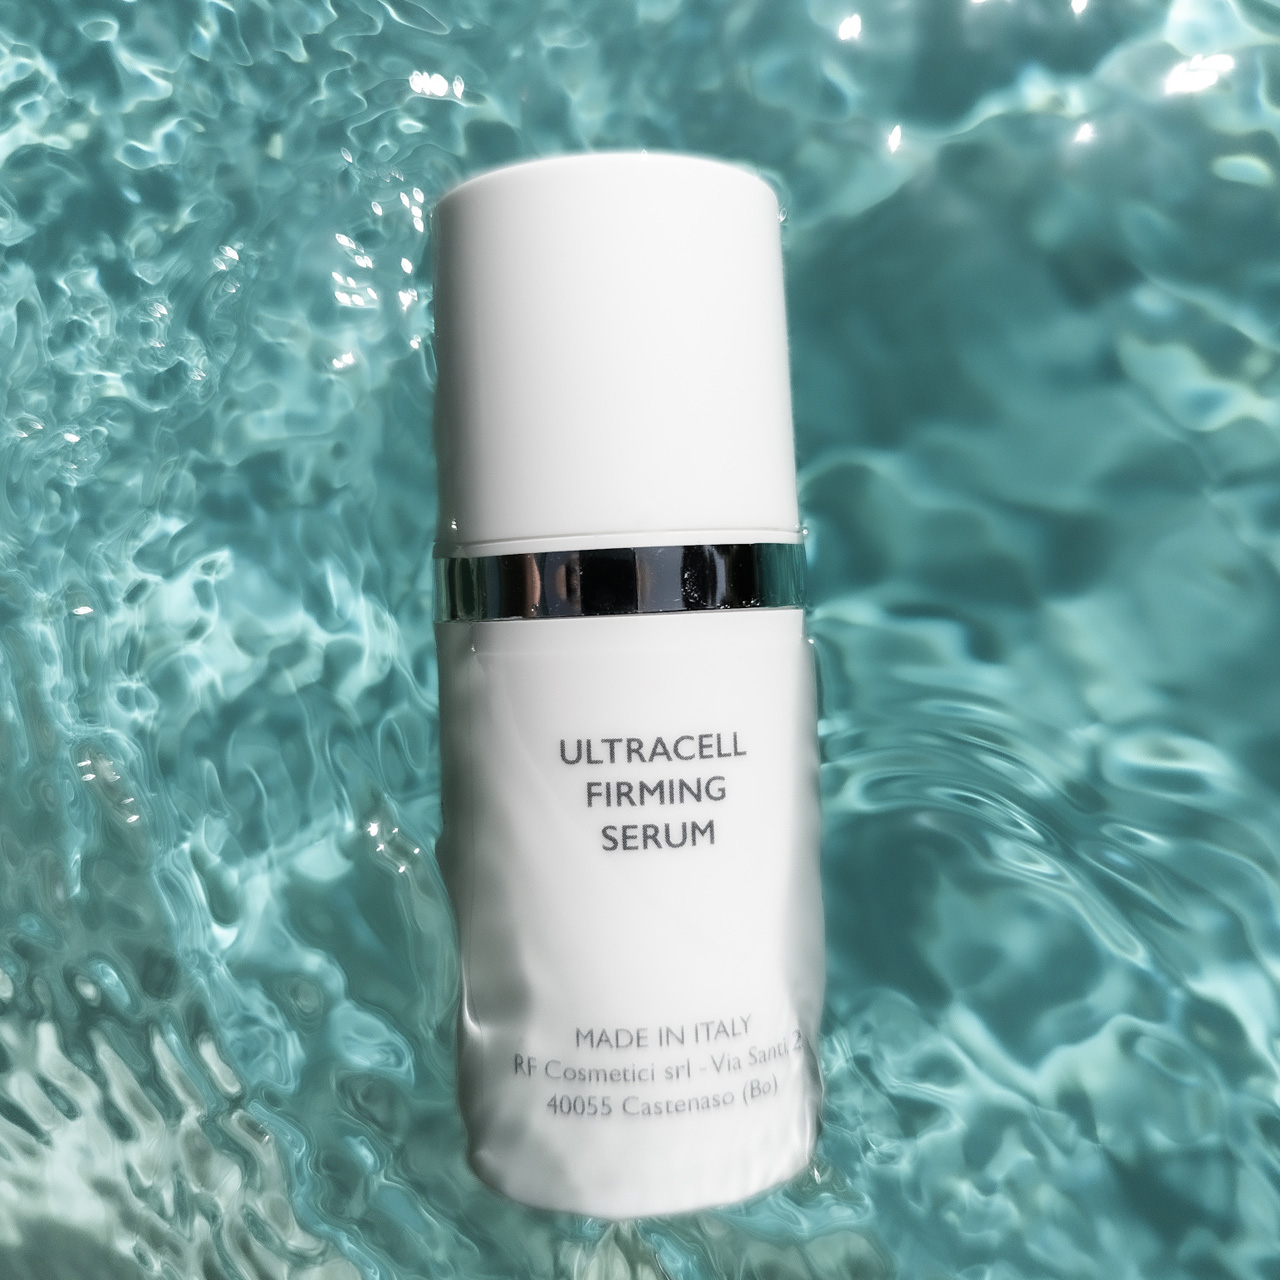 Ultracell firming serum TdS water shooting